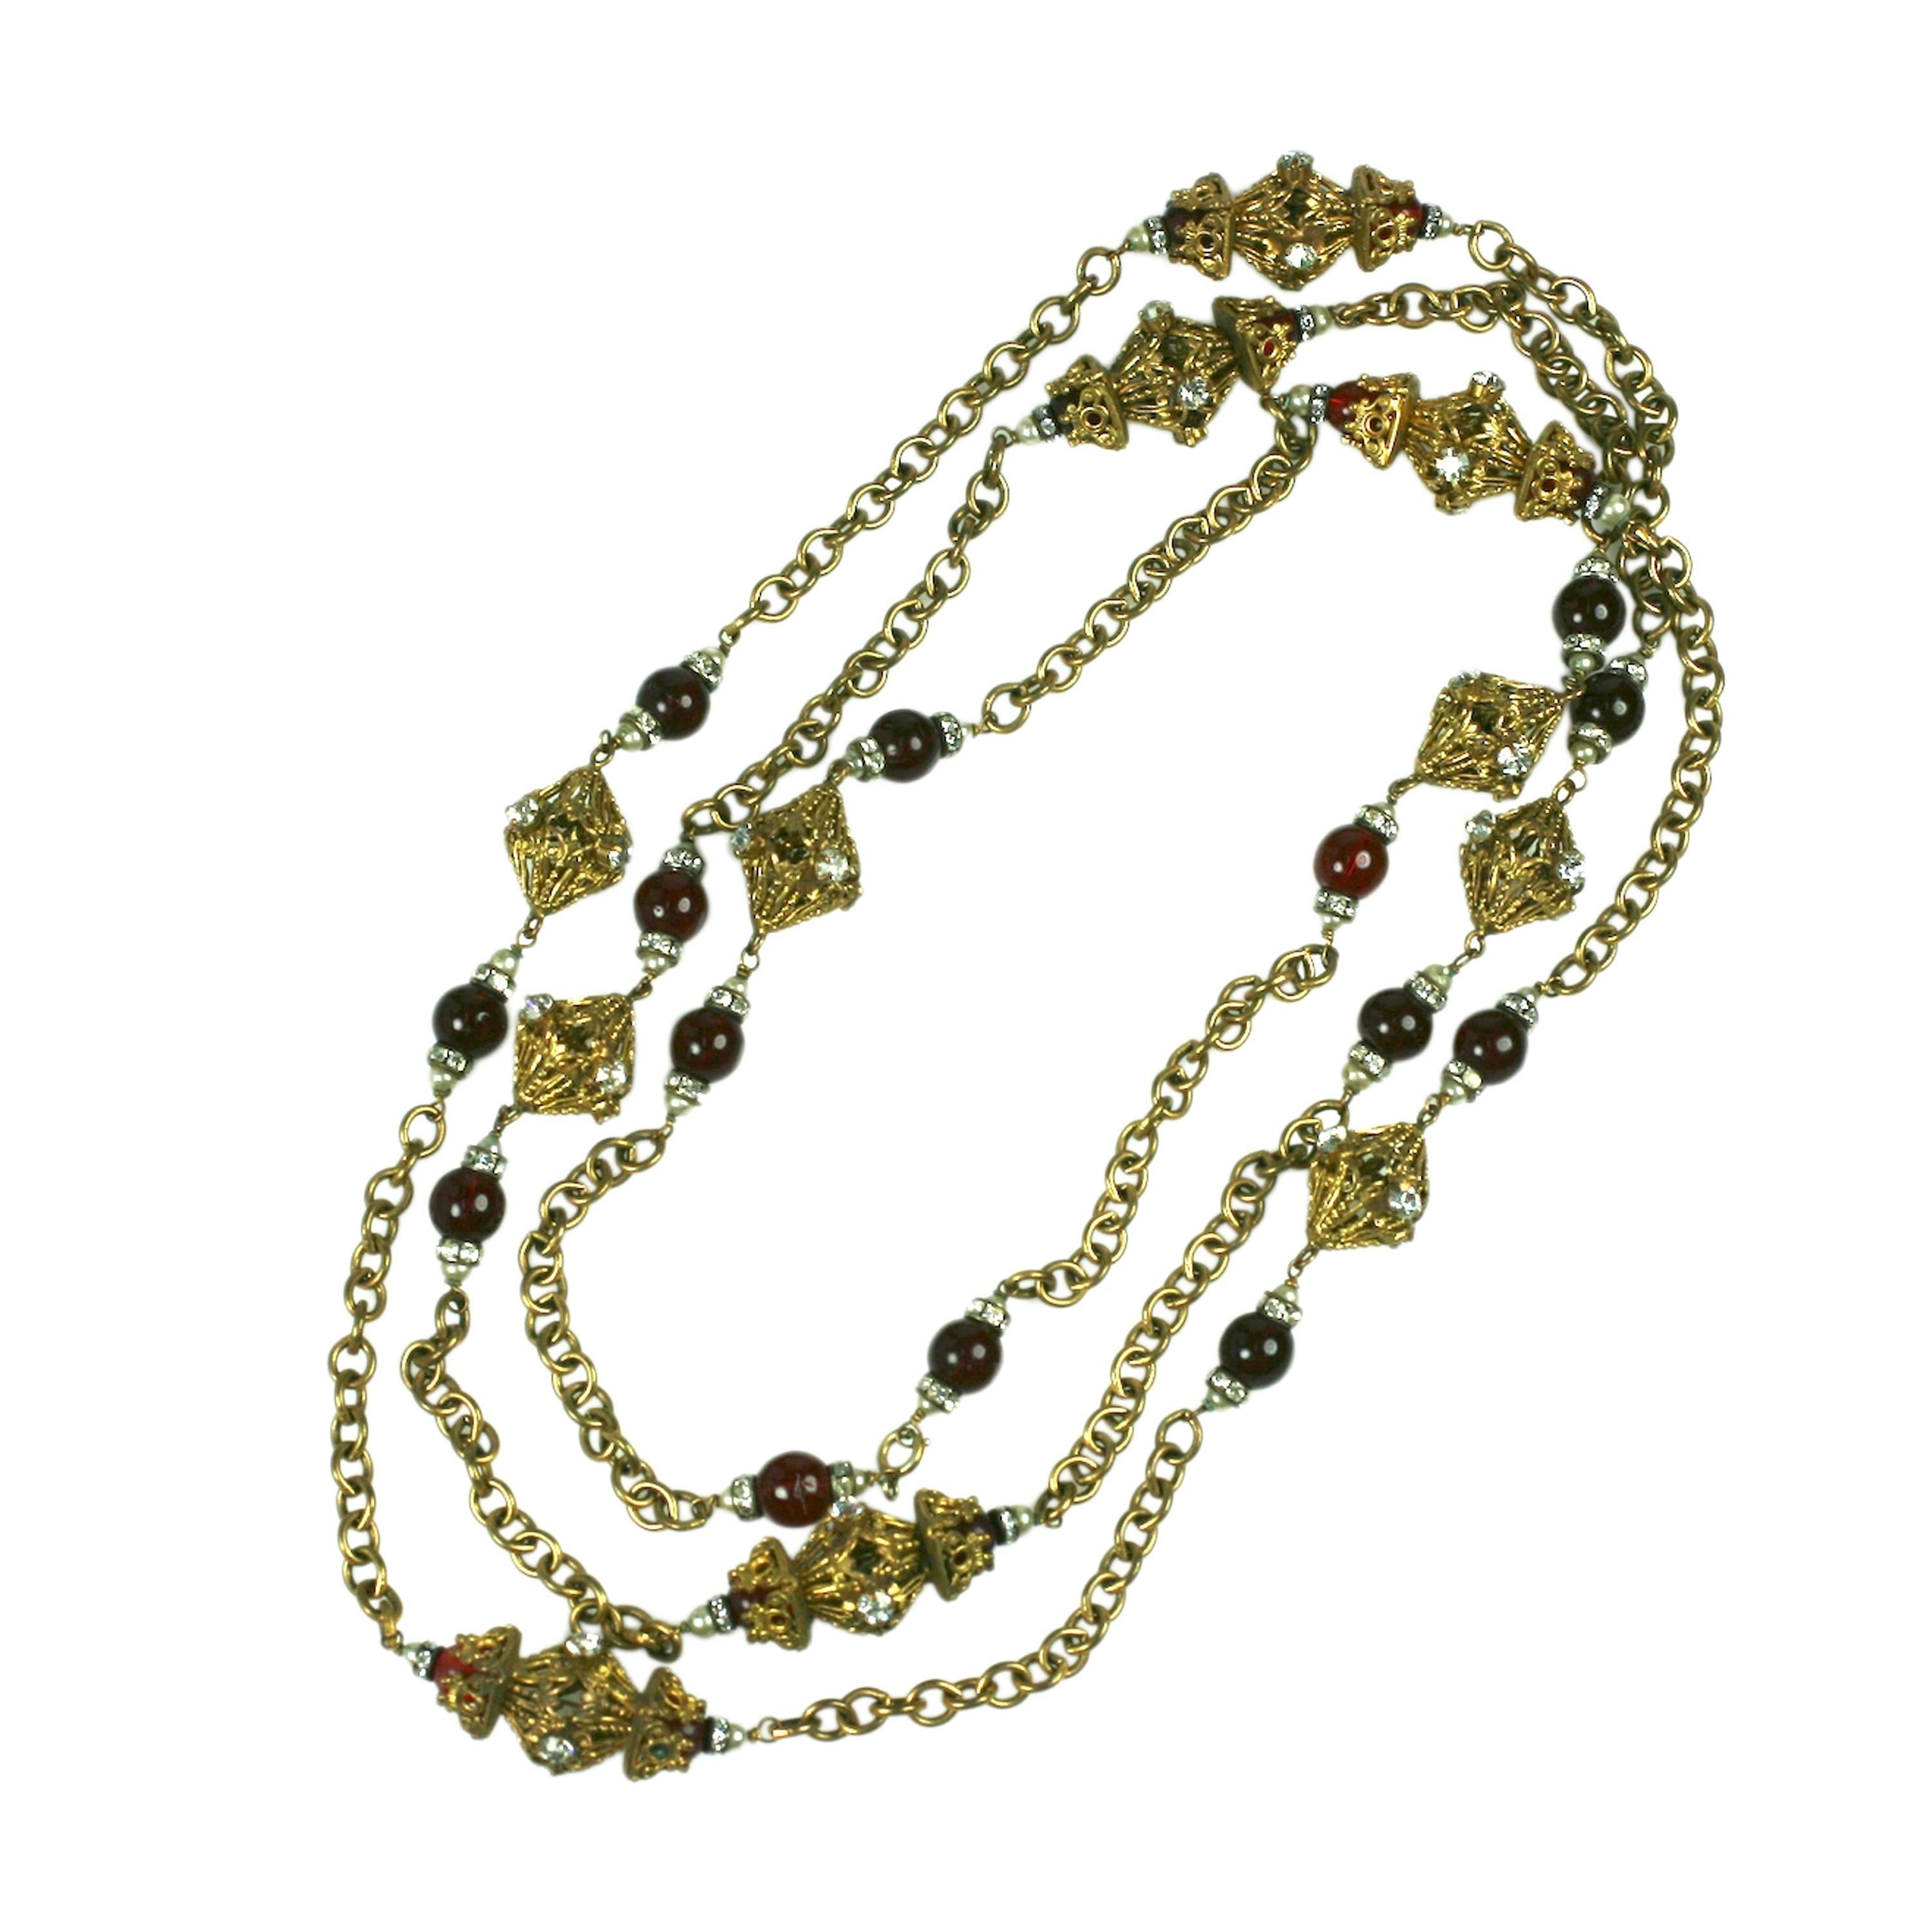 Chanel Iconic Sautoir Necklace by Goossens